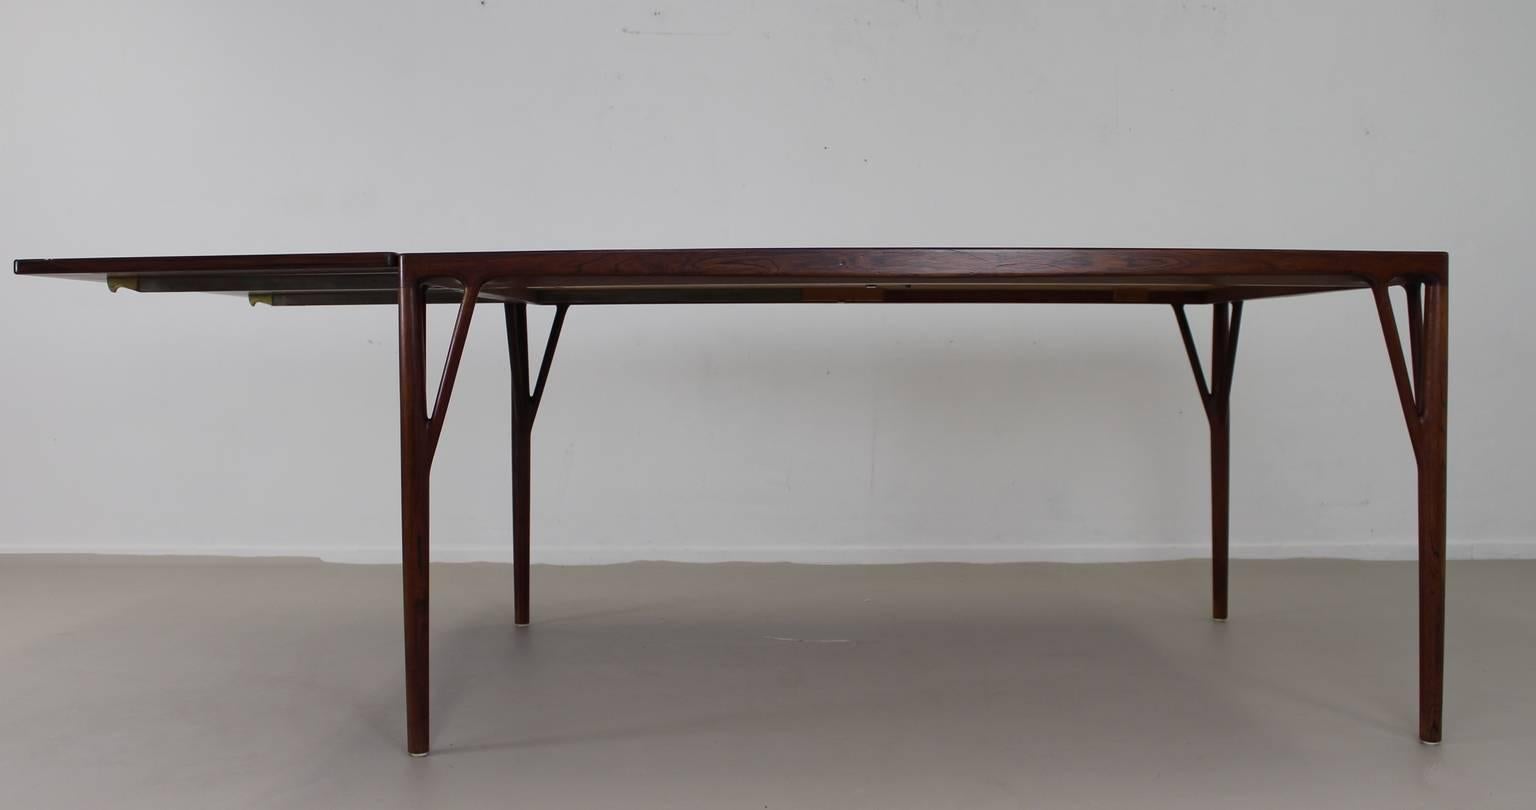 Incredible sculptural wooden legs integrated in the top of the table.
Design: Helge Jensen Vestergaard, 1956. 
Documented Mobilia, September, 1959. 
Rosewood and rosewood veneer. 
Total length of the table with flap is 220cm.
Supports of metal